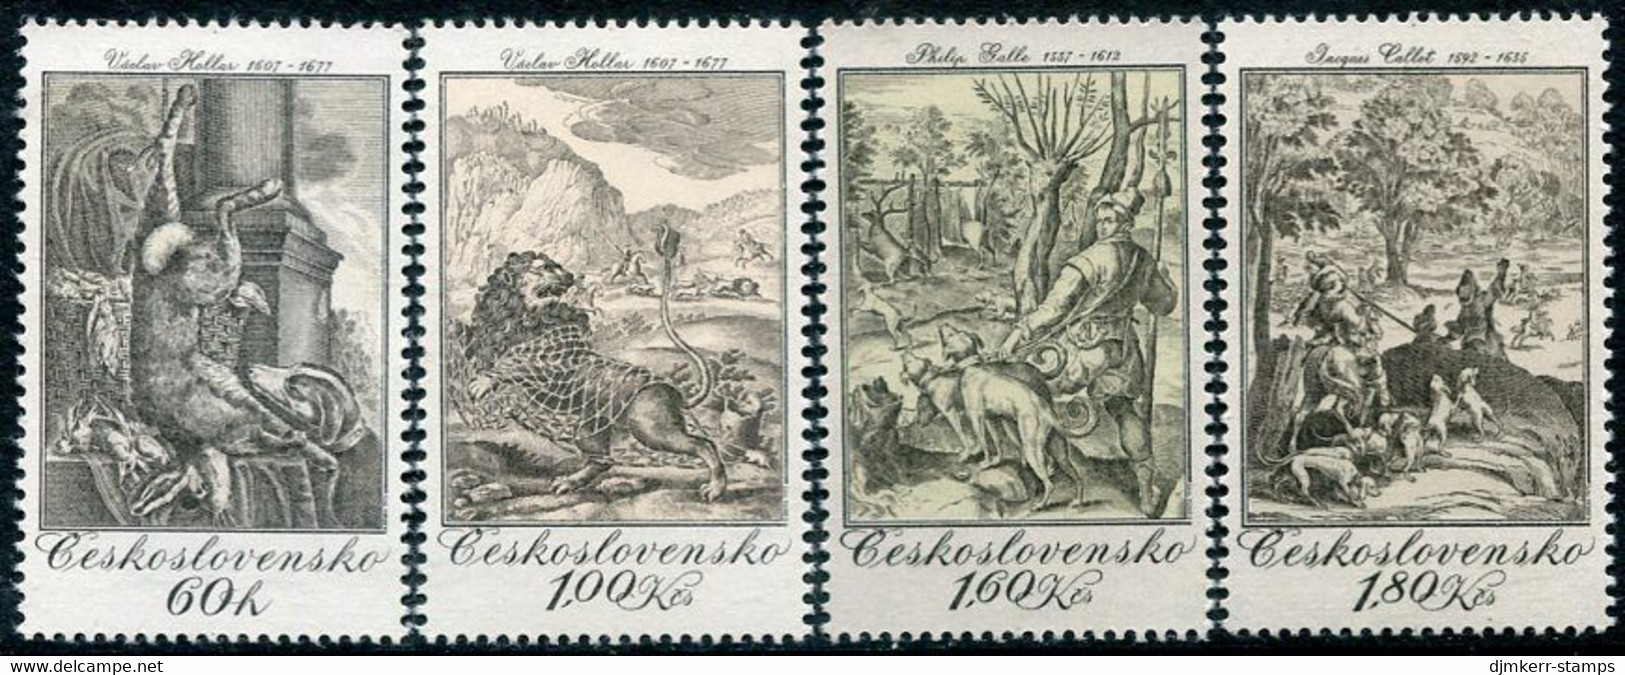 CZECHOSLOVAKIA 1975 Engravings With Hunting Scenes MNH / **. Michel 2240-43 - Nuevos